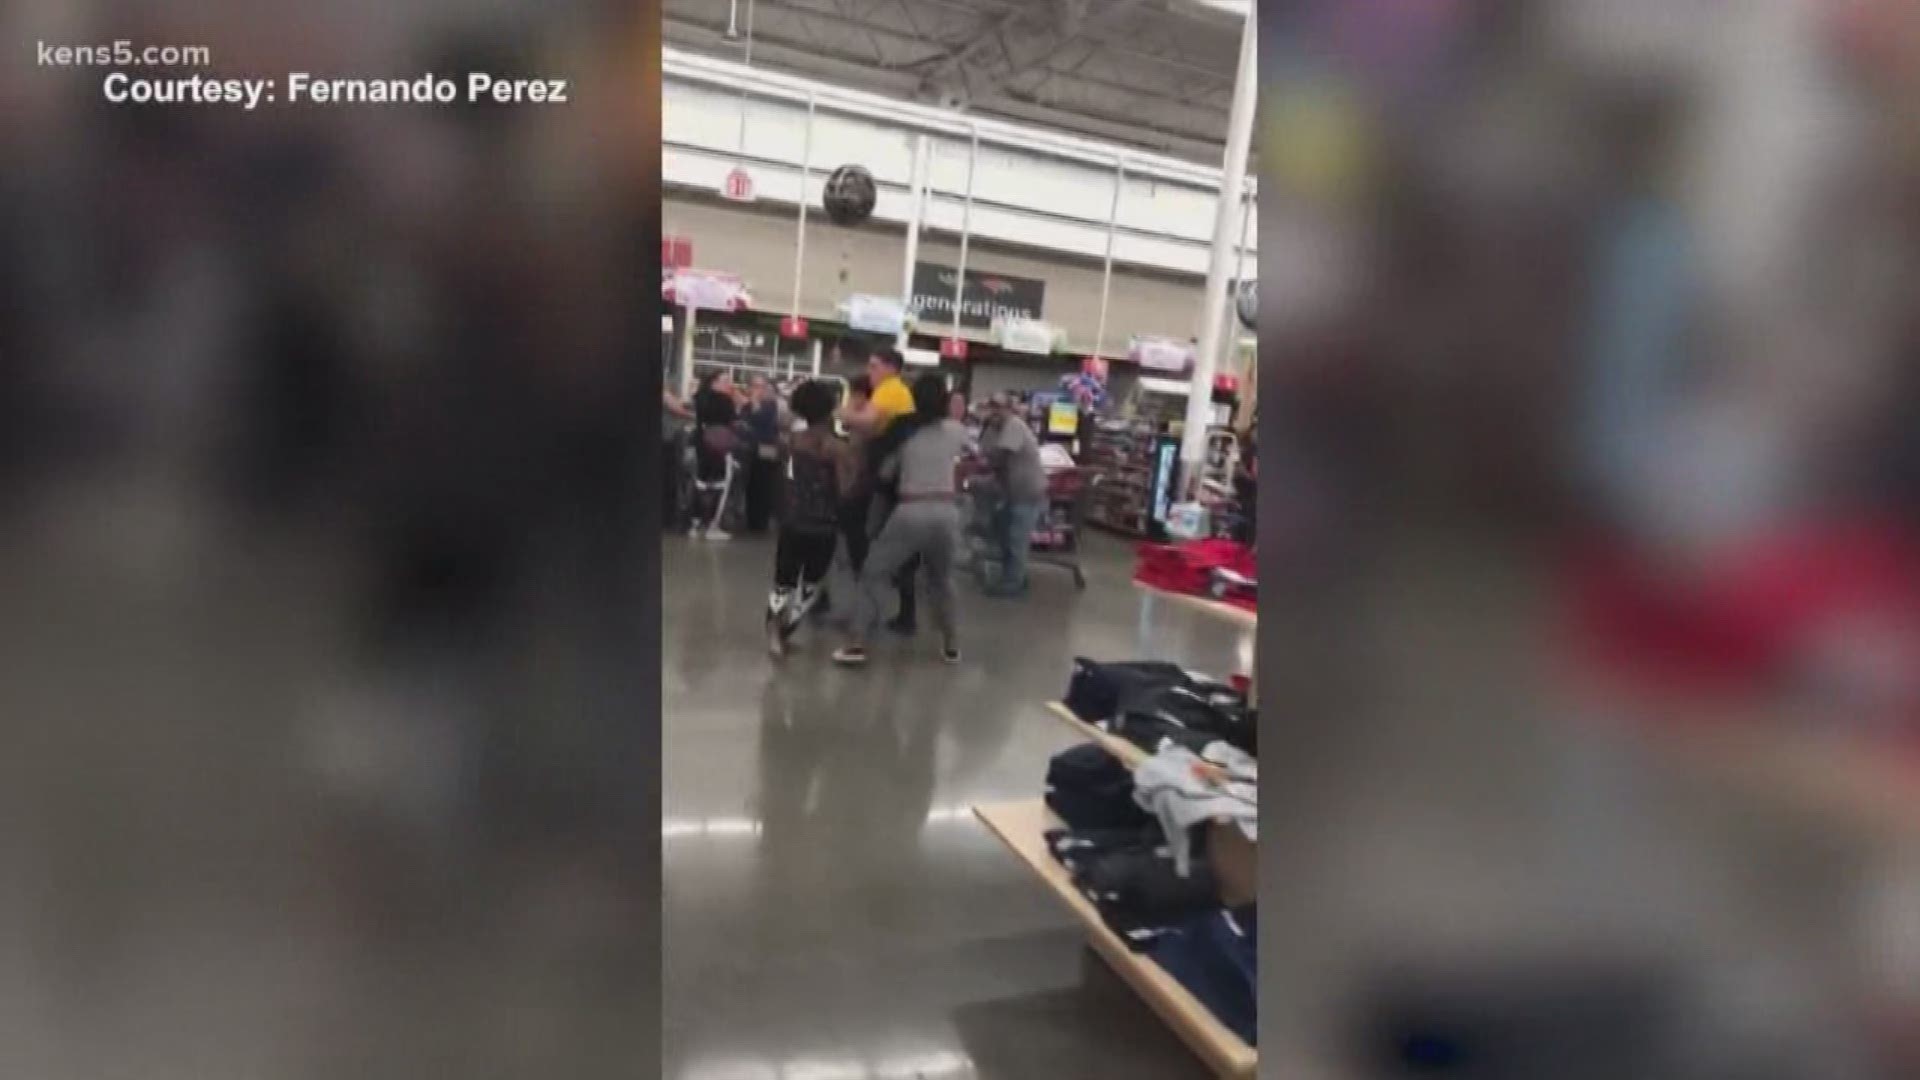 The video shows store employees trying to break up a fight between two groups of people at the southeast-side location.